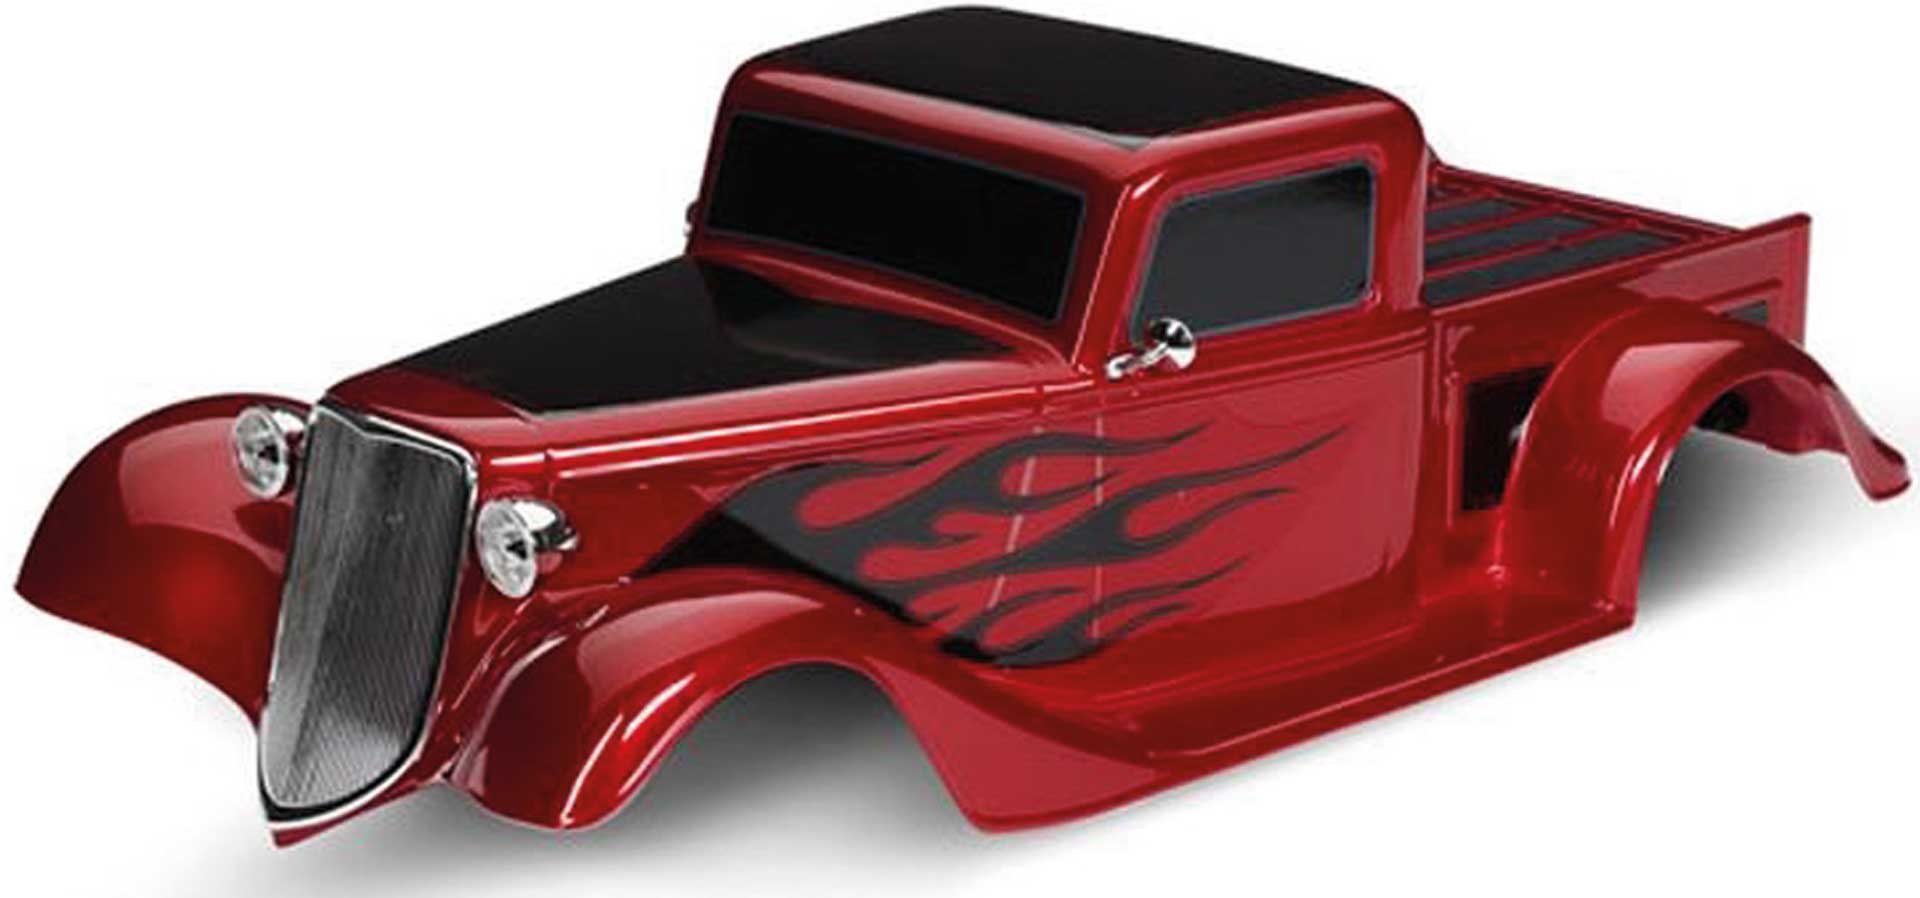 TRAXXAS Karo Factory Five '35 Hot Rod Truck (red) painted) + add-on parts